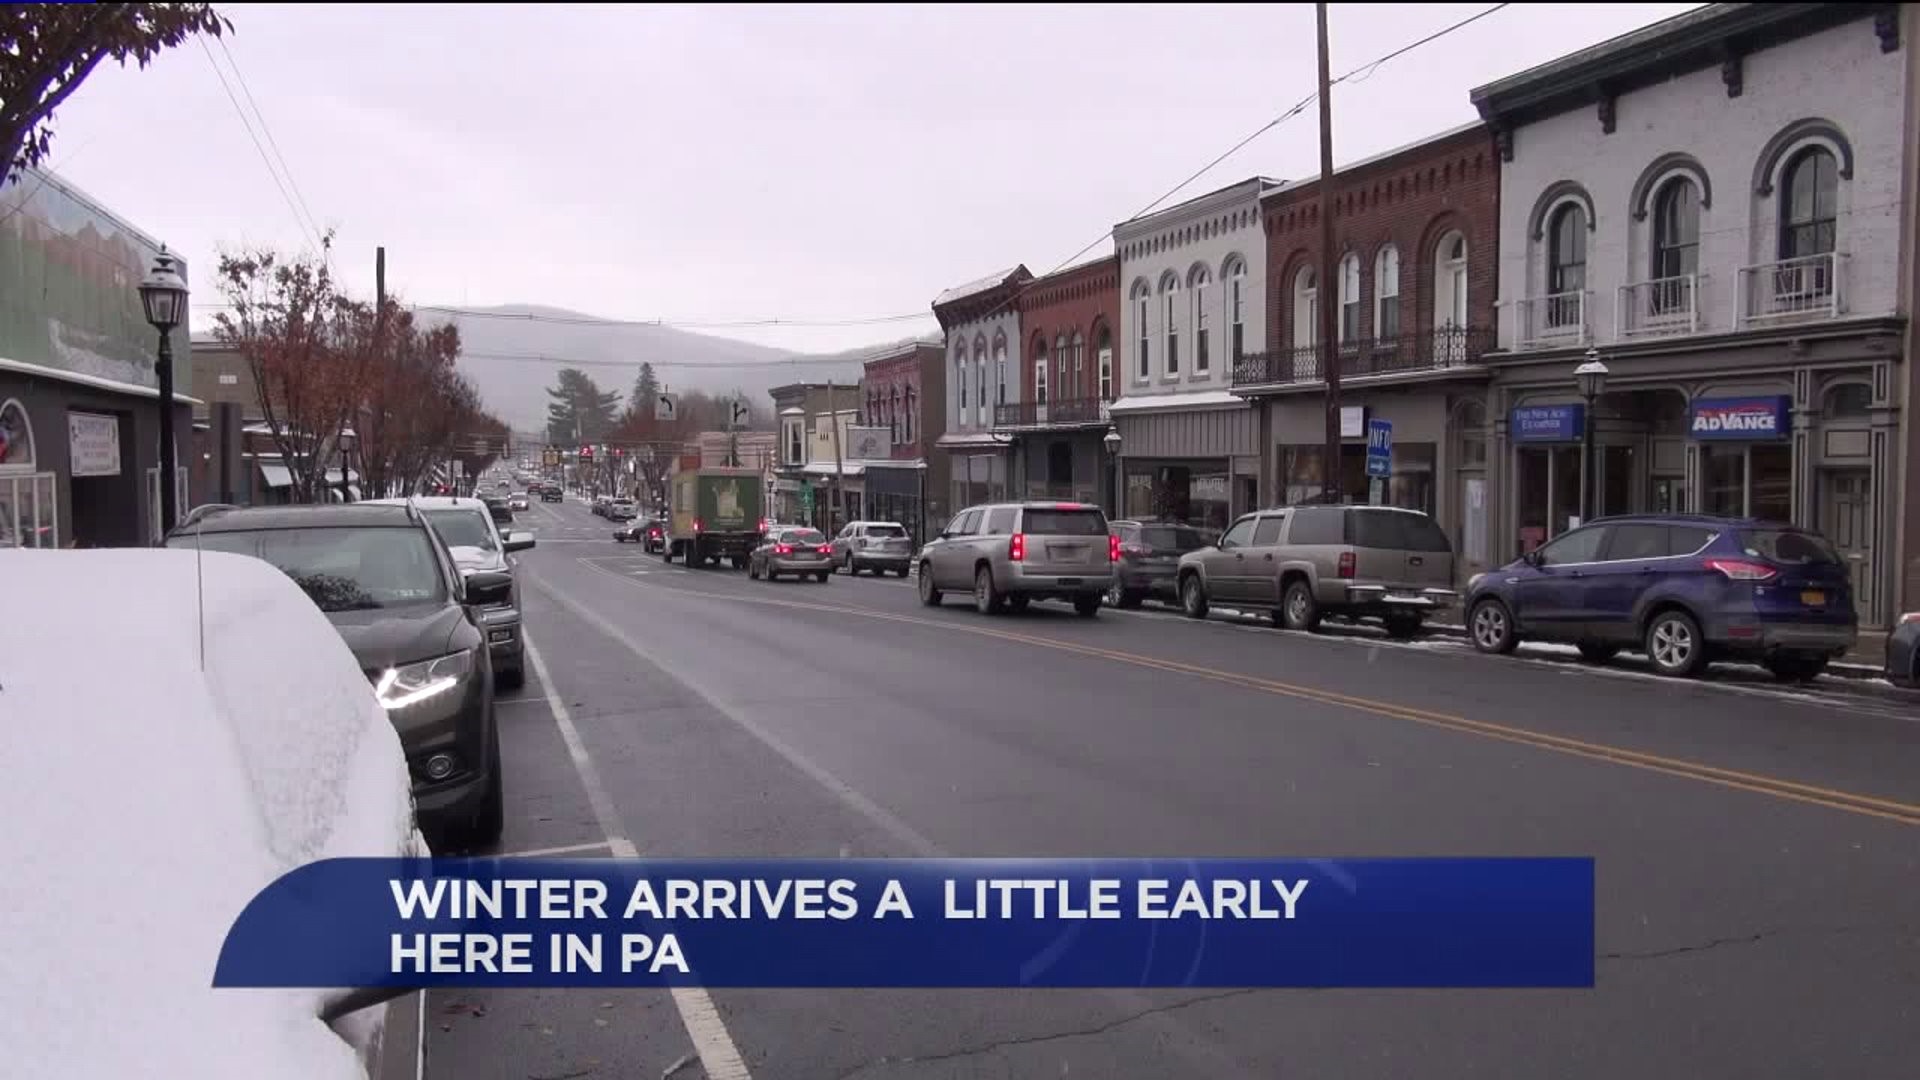 Winter Comes a Little Early to Wyoming County